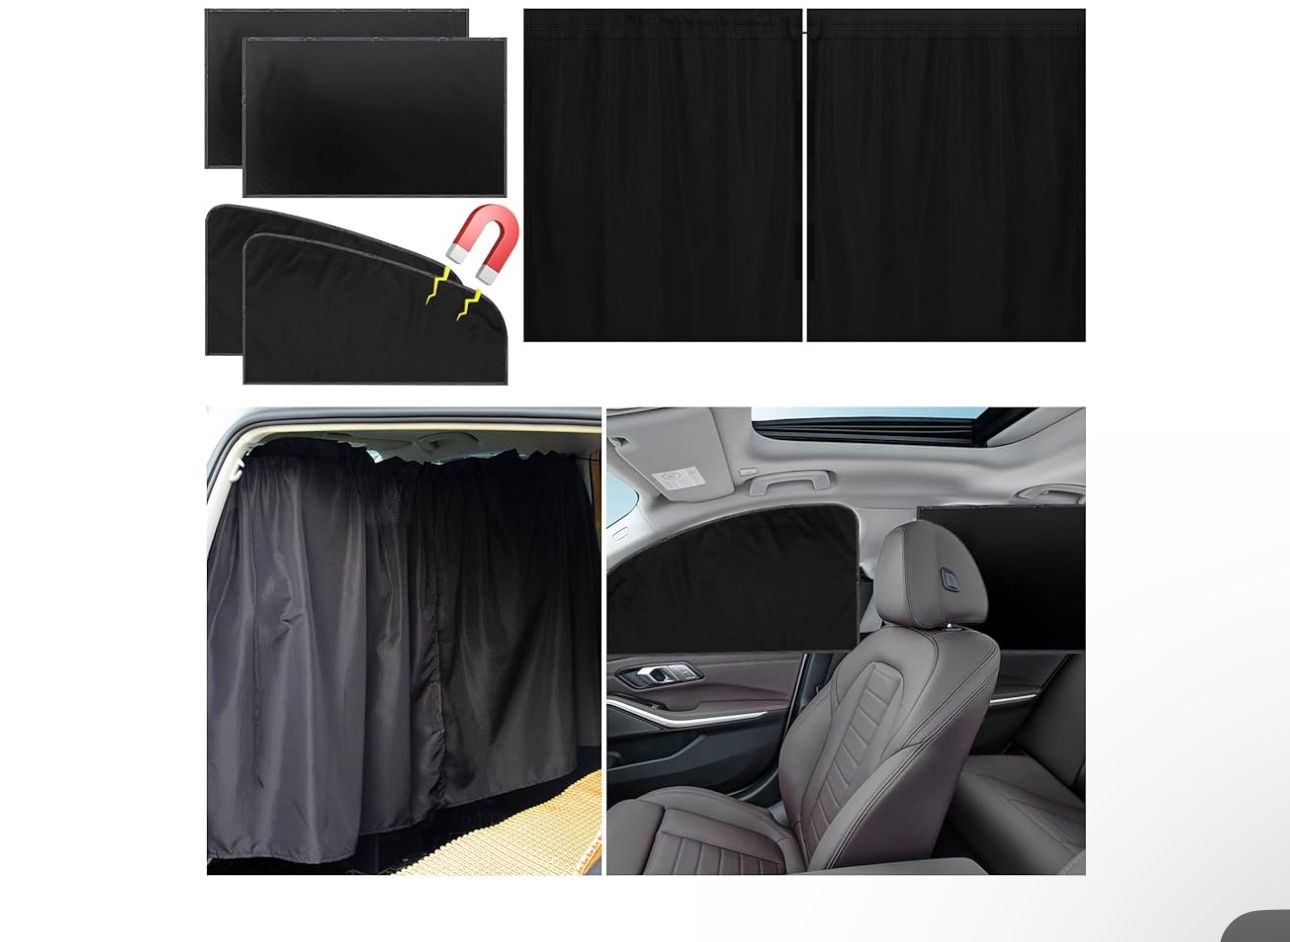 Set of 5 Car Privacy Curtains - 4 Magnetic Side Car Window Curtains & 1 Rear Seat Divider Curtain with Storage Bag, Sun Baby Shades Screen Covers for 